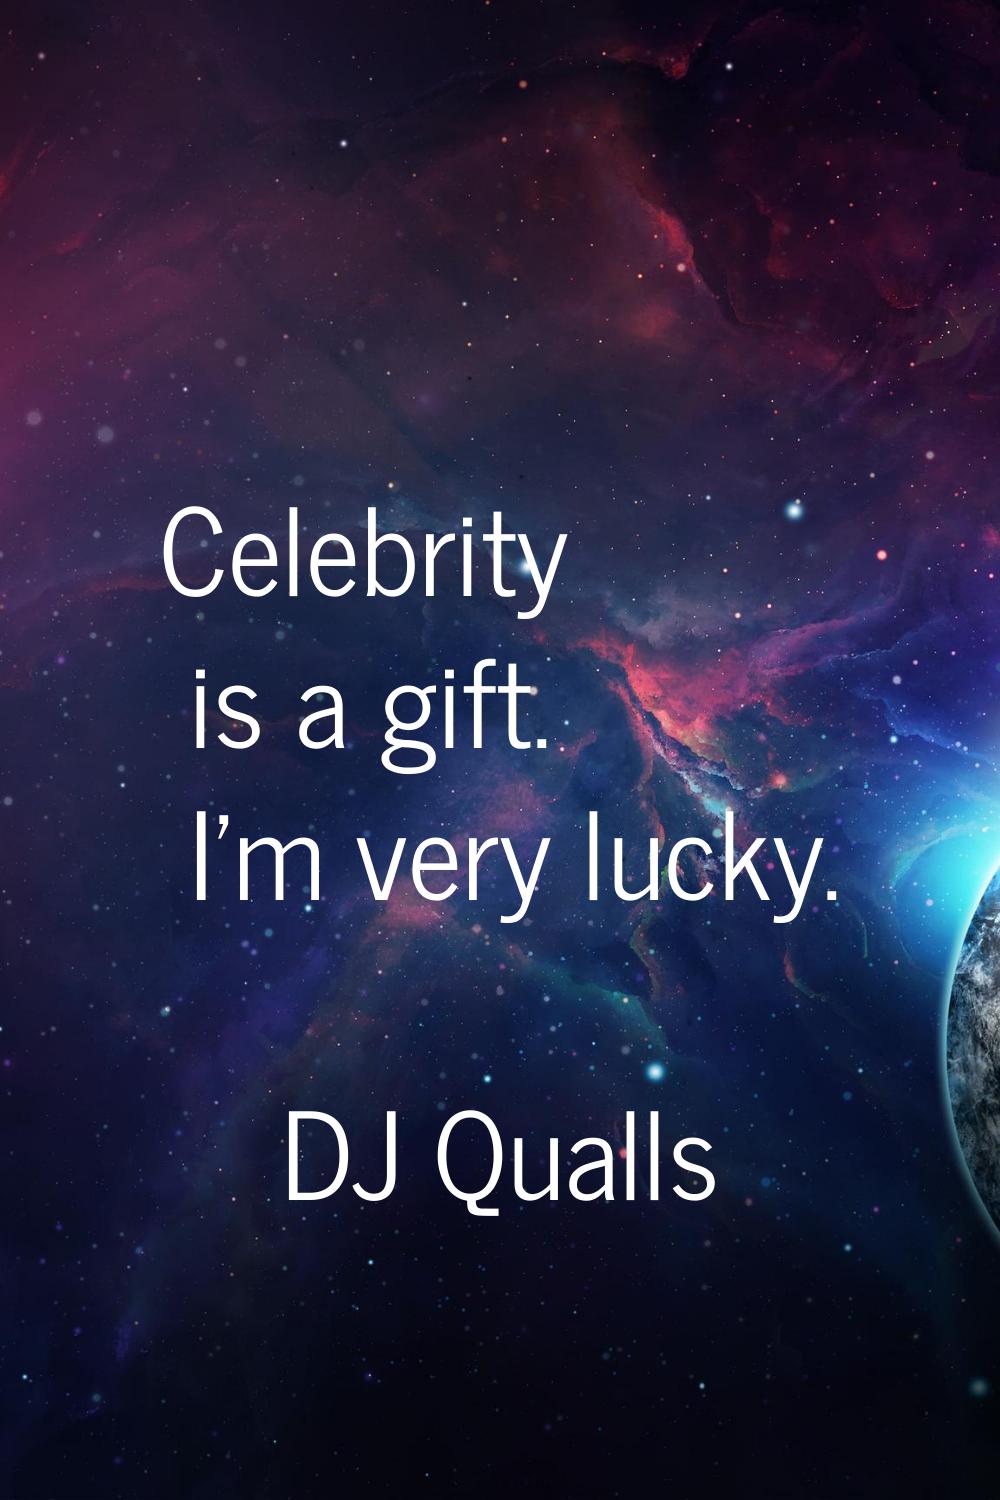 Celebrity is a gift. I'm very lucky.